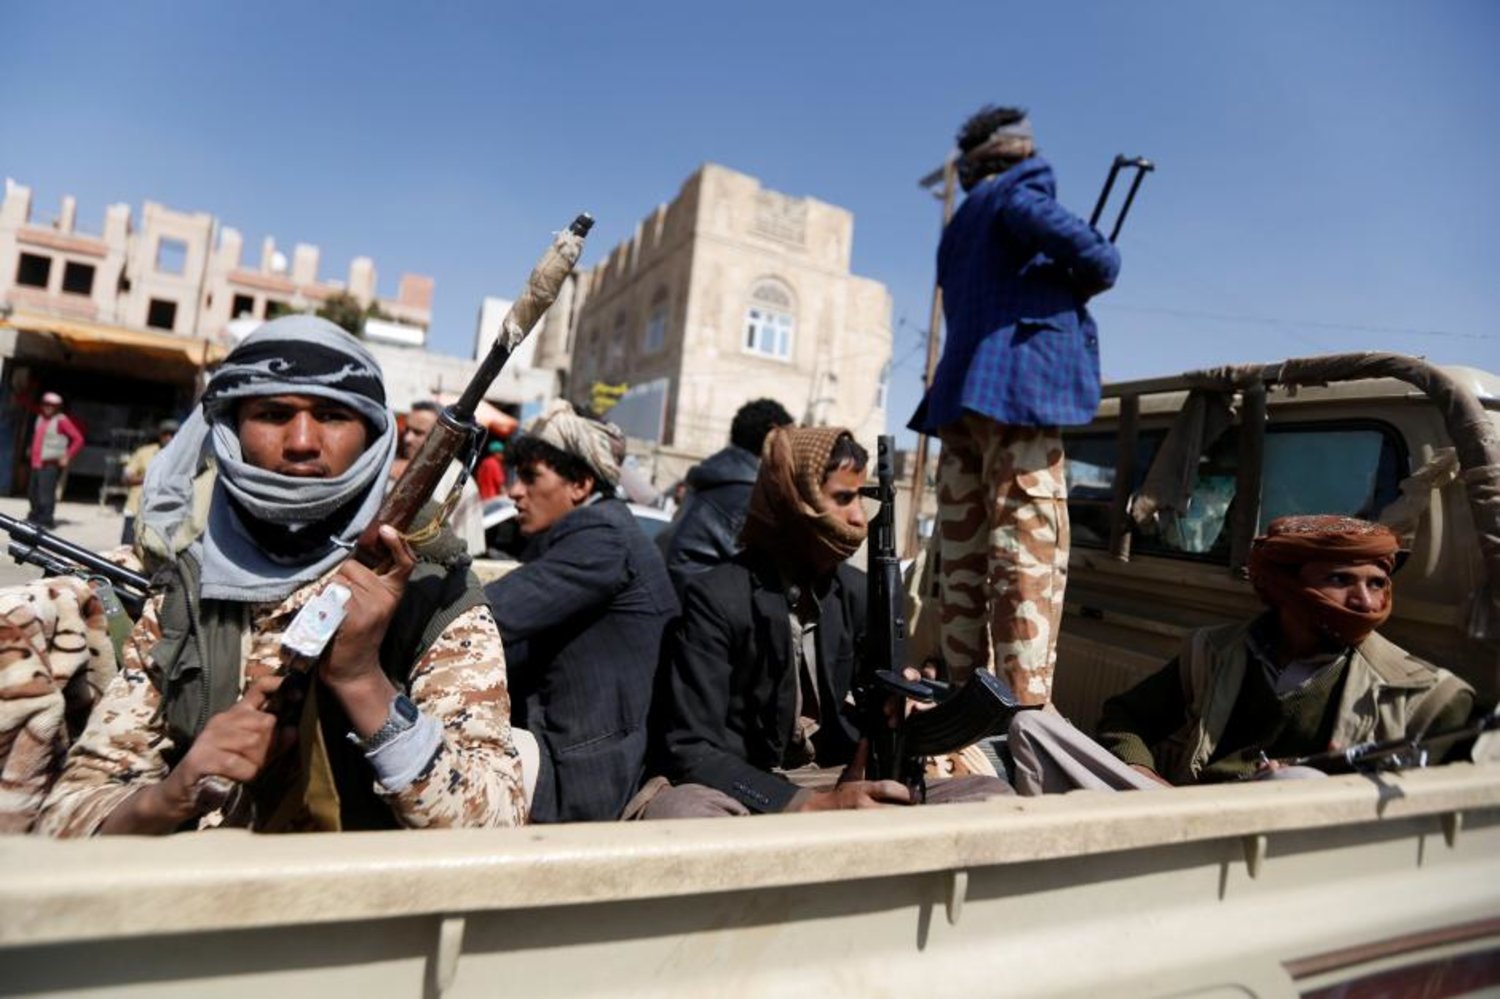 Houthi militants ride on the back of a truck in Sana'a. Reuters